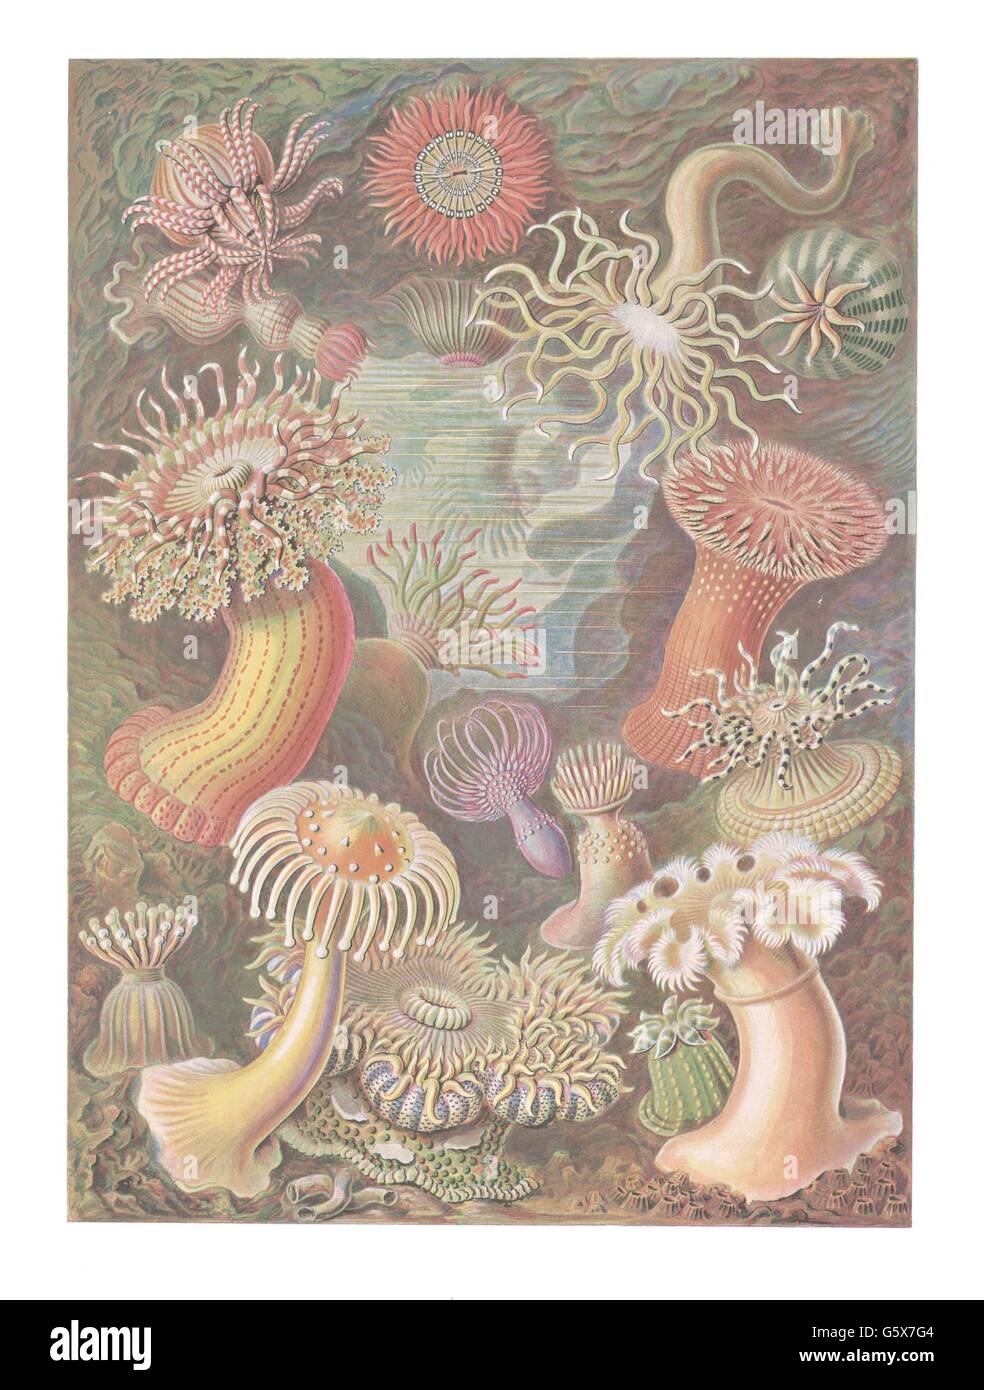 zoology / animals, anthozoa, sea anemones (Actinaria), colour lithograph, out of: Ernst Haeckel, 'Kunstformen der Natur', Leipzig - Vienna, 1899 - 1904, Additional-Rights-Clearences-Not Available Stock Photo